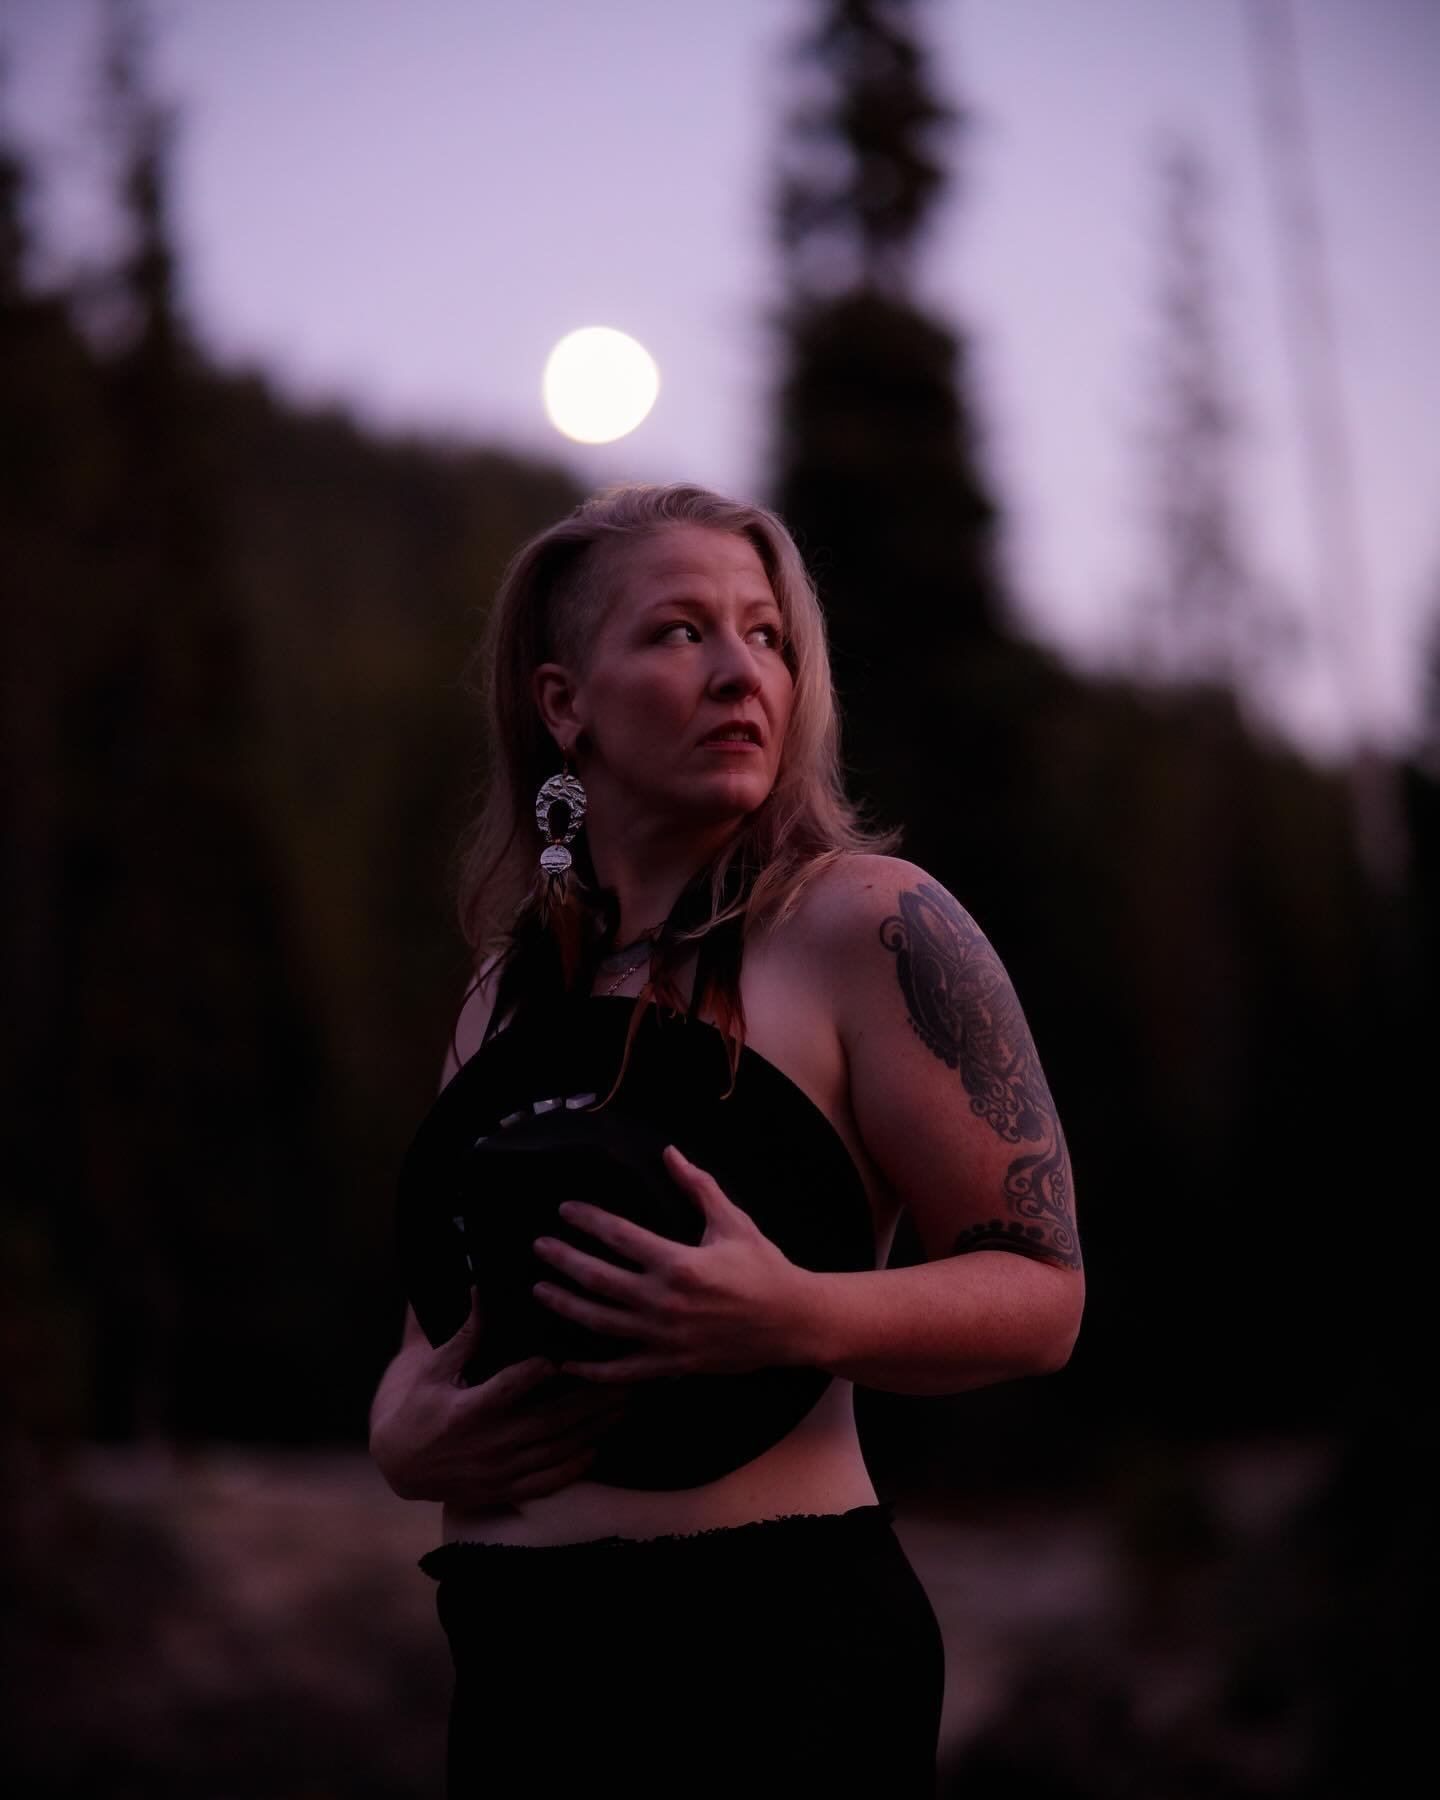 Who else is feeling a little witchy with all these nighttime cosmic phenomena? Makes me wanna dress up like @slade_the_siren and do Stevie Nicks things by a lake! 🙌

#witchyphotoshoot #stevienicks #golddustwoman #outdoorboudoir #boudoirphotographer 